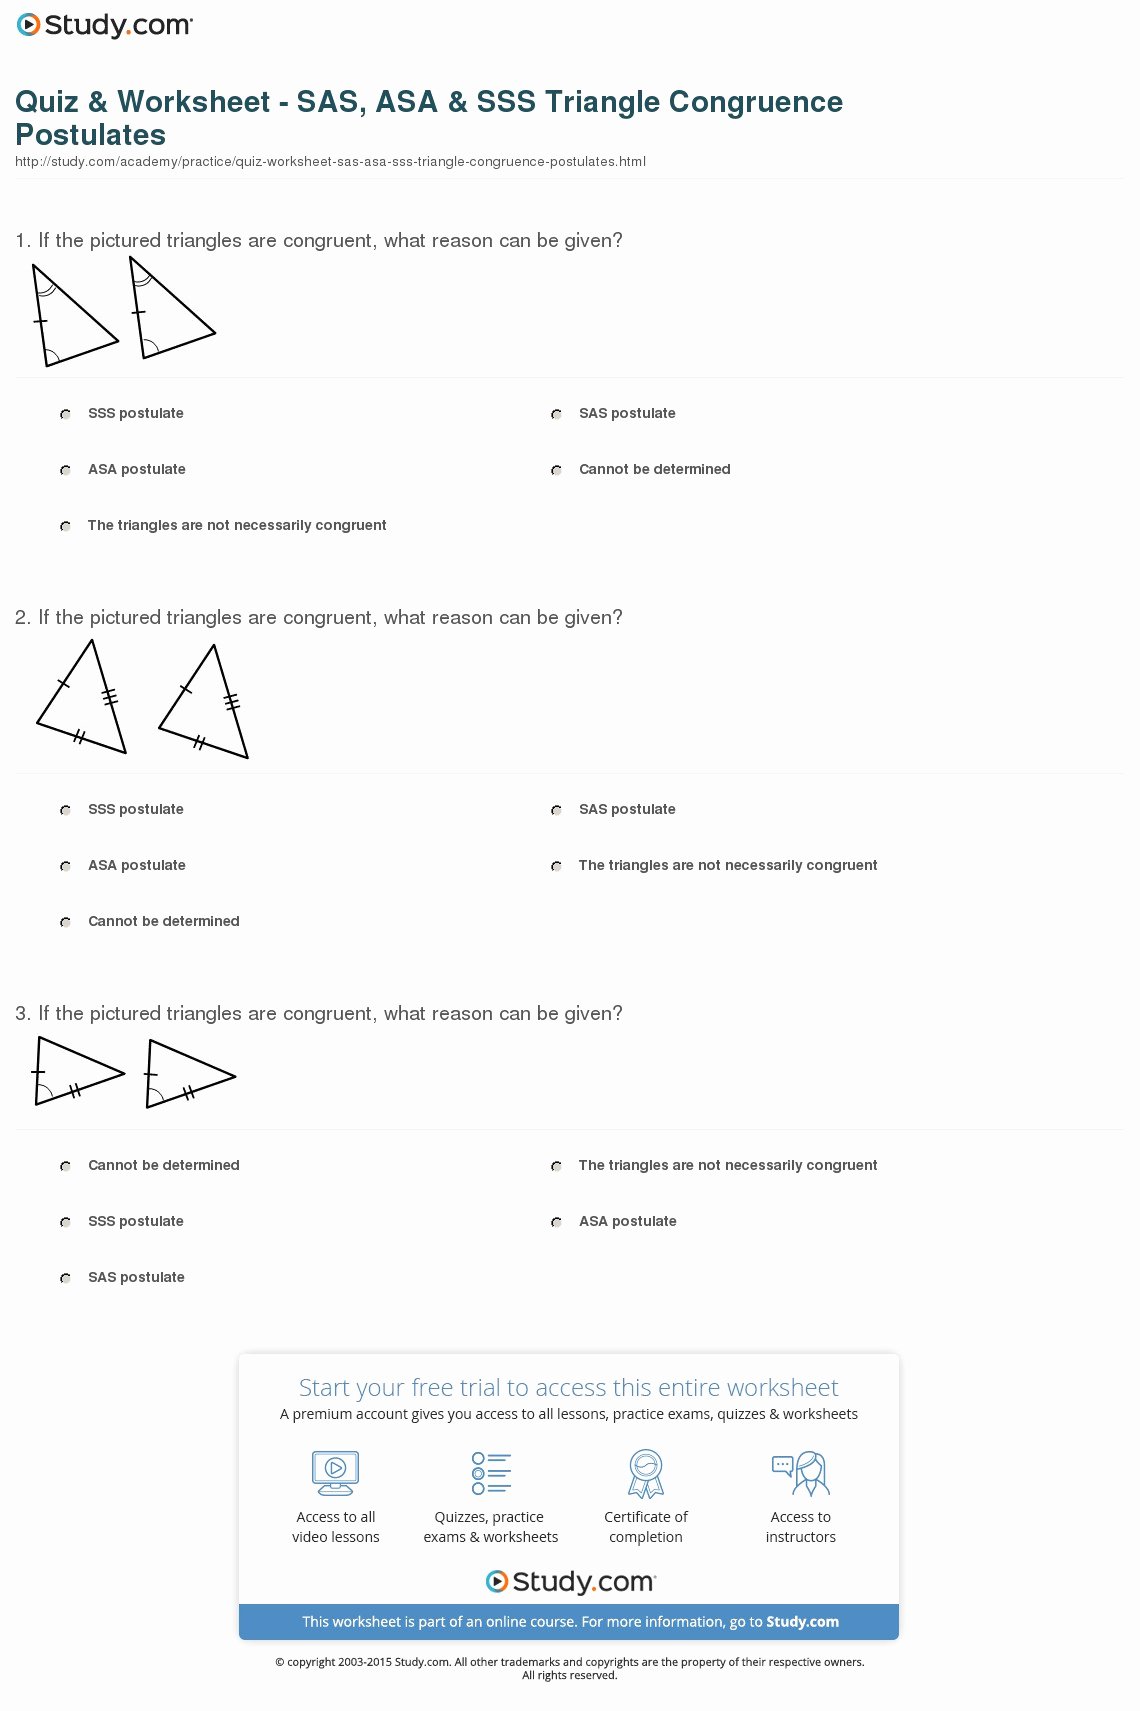 Congruent Triangles Worksheet Answers Unique Quiz &amp; Worksheet Sas asa &amp; Sss Triangle Congruence